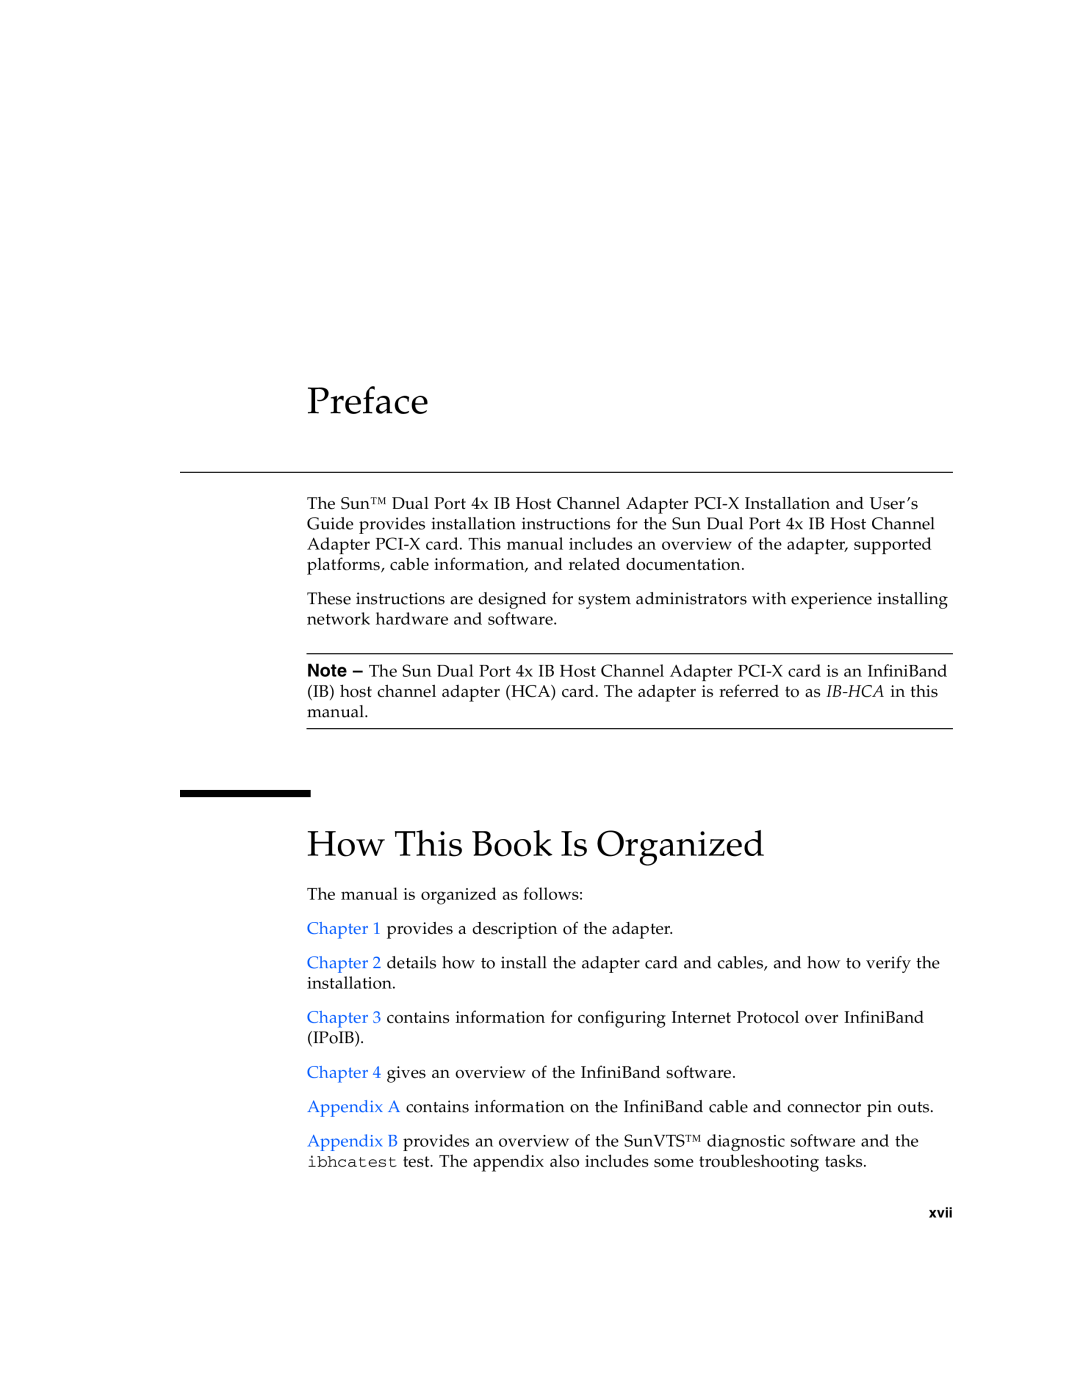 Sun Microsystems PCI manual Preface, How This Book Is Organized 